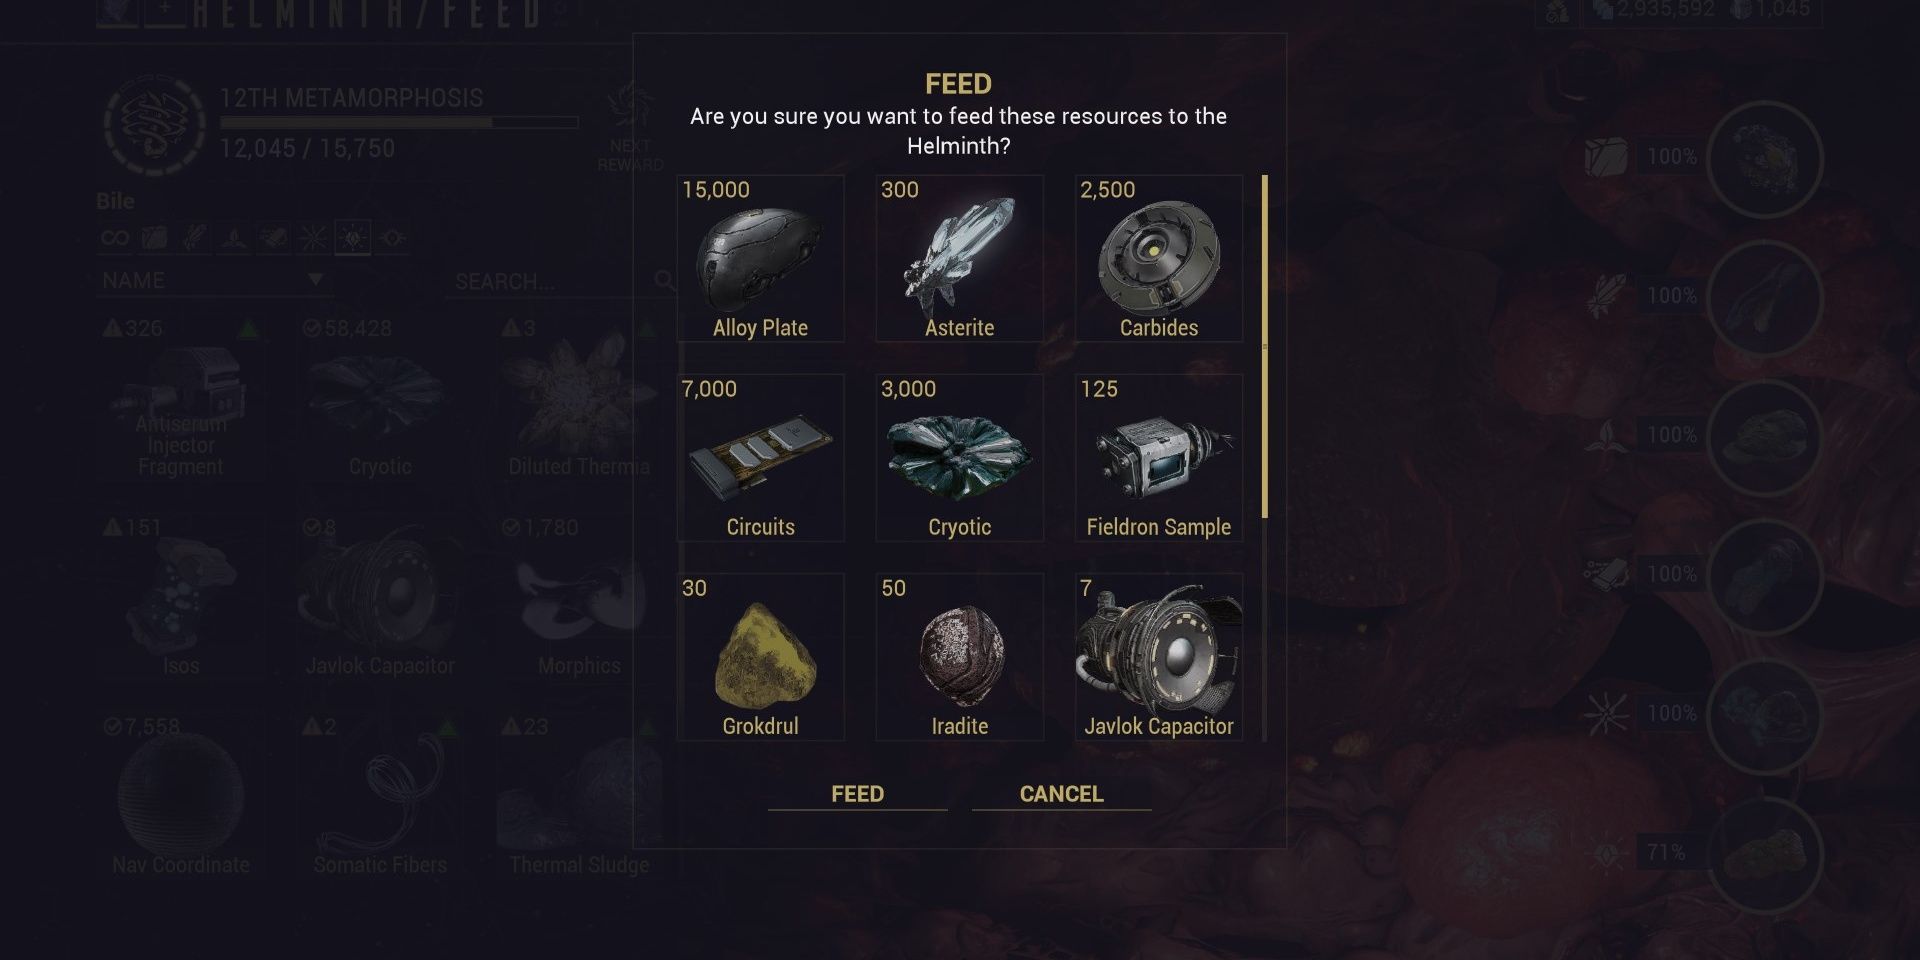 Warframe Helminth Feed Confirm Prompt